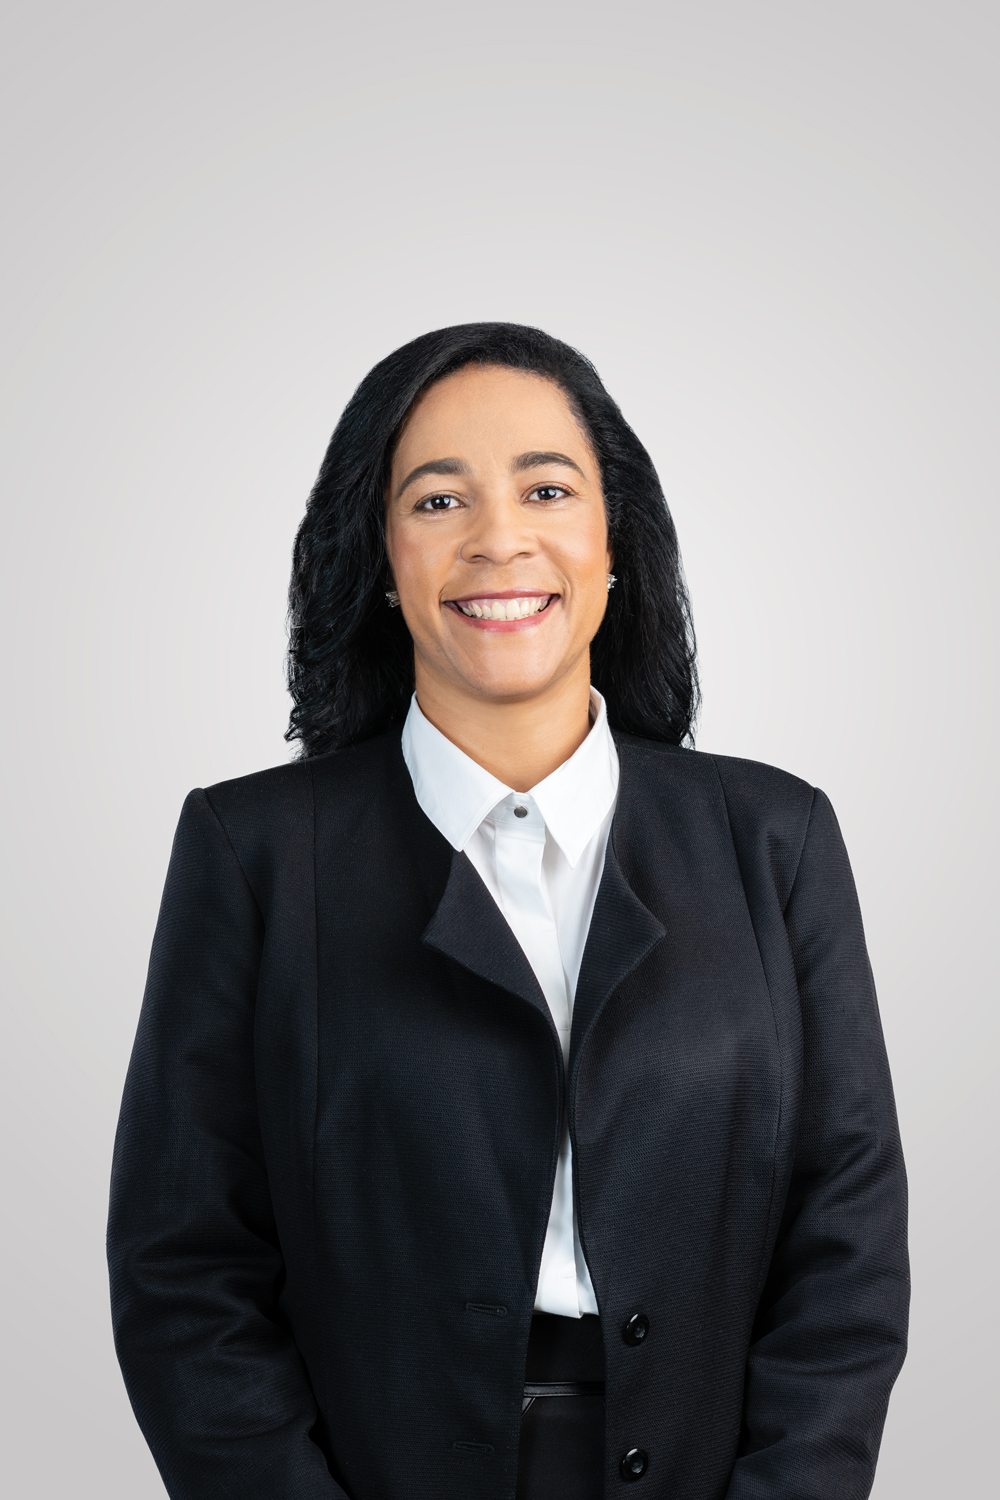 Bank Windhoek’s Executive Officer of Marketing and Corporate Communication Services, Jacquiline Pack